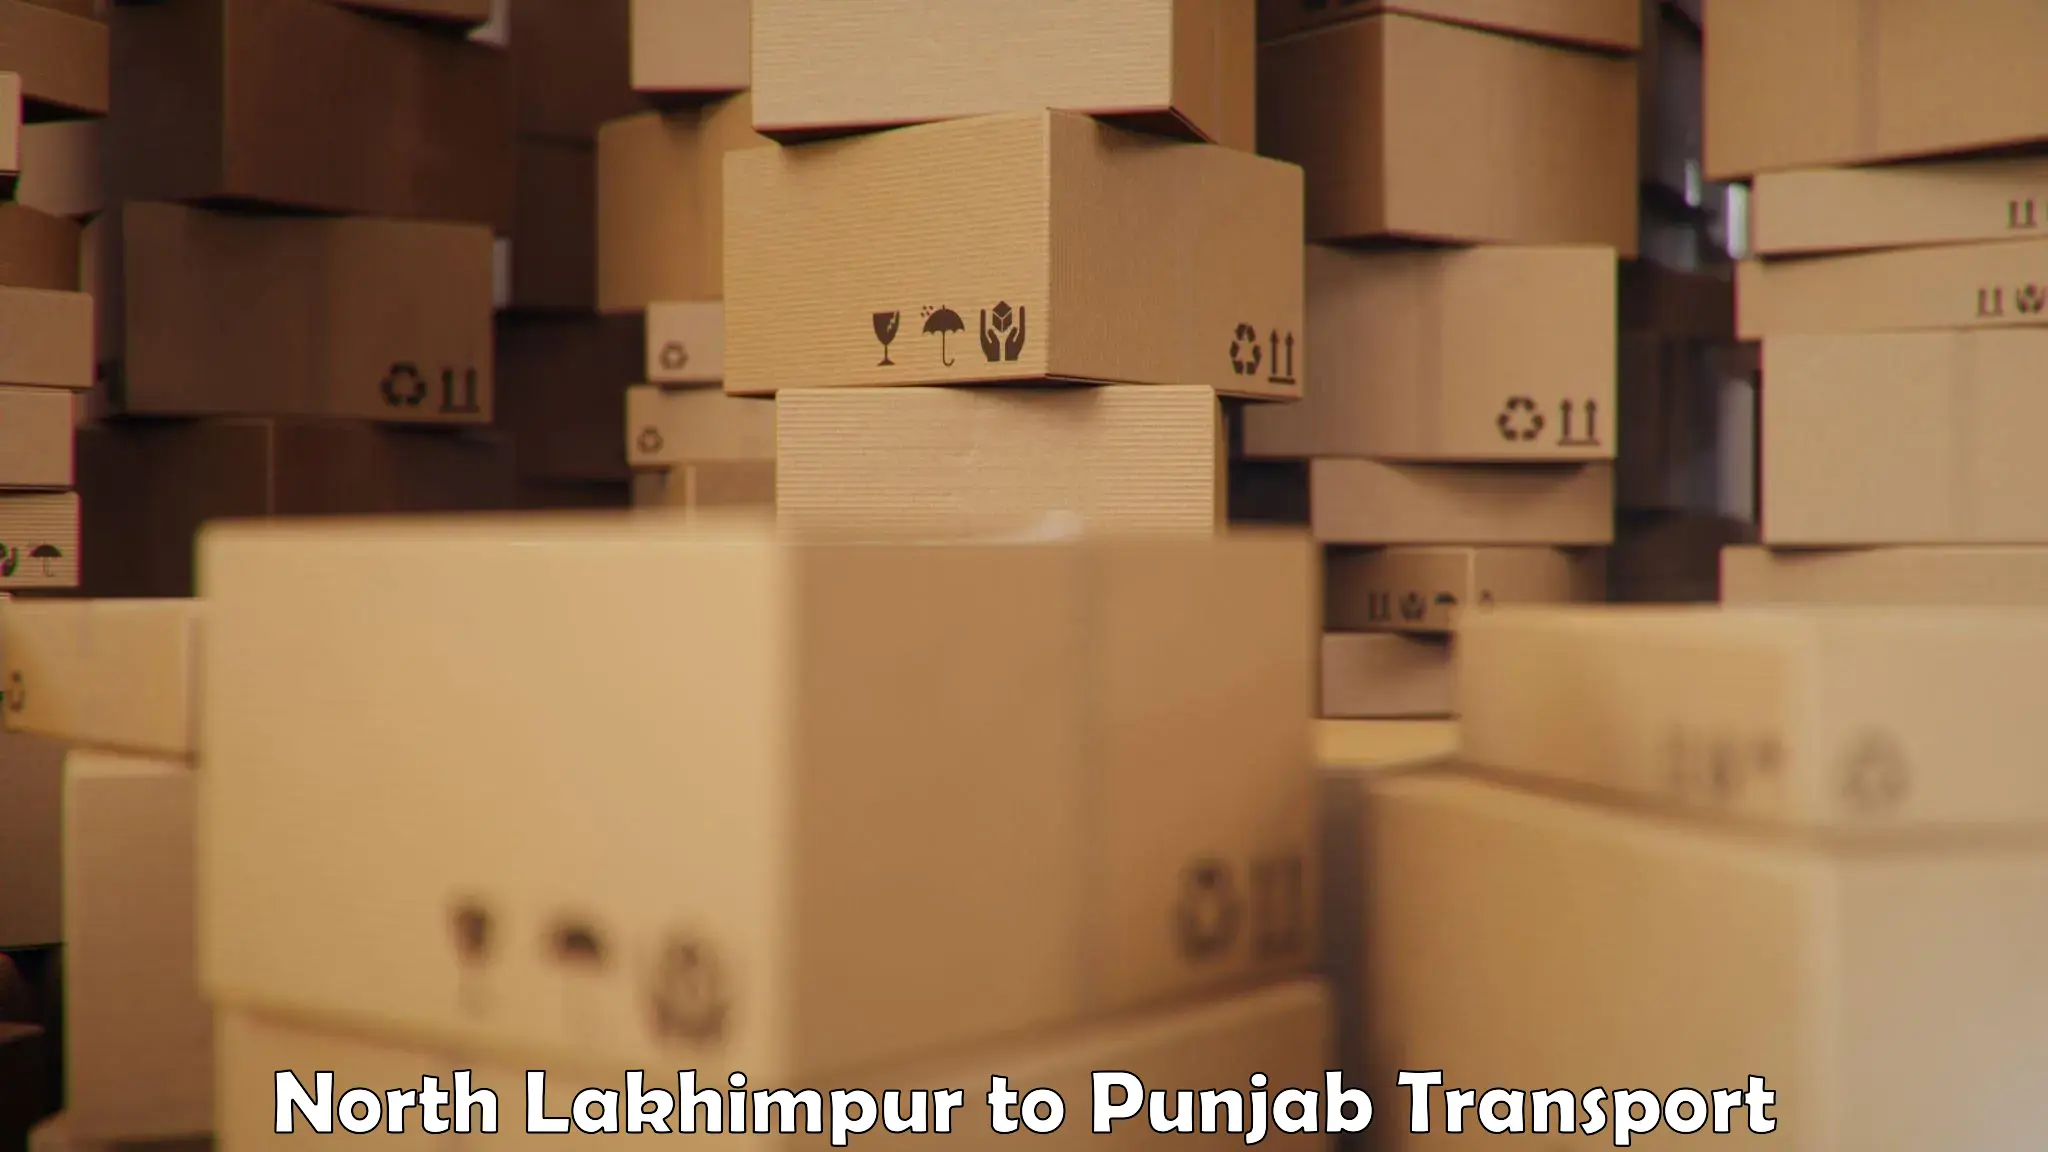 Transport services in North Lakhimpur to Amritsar